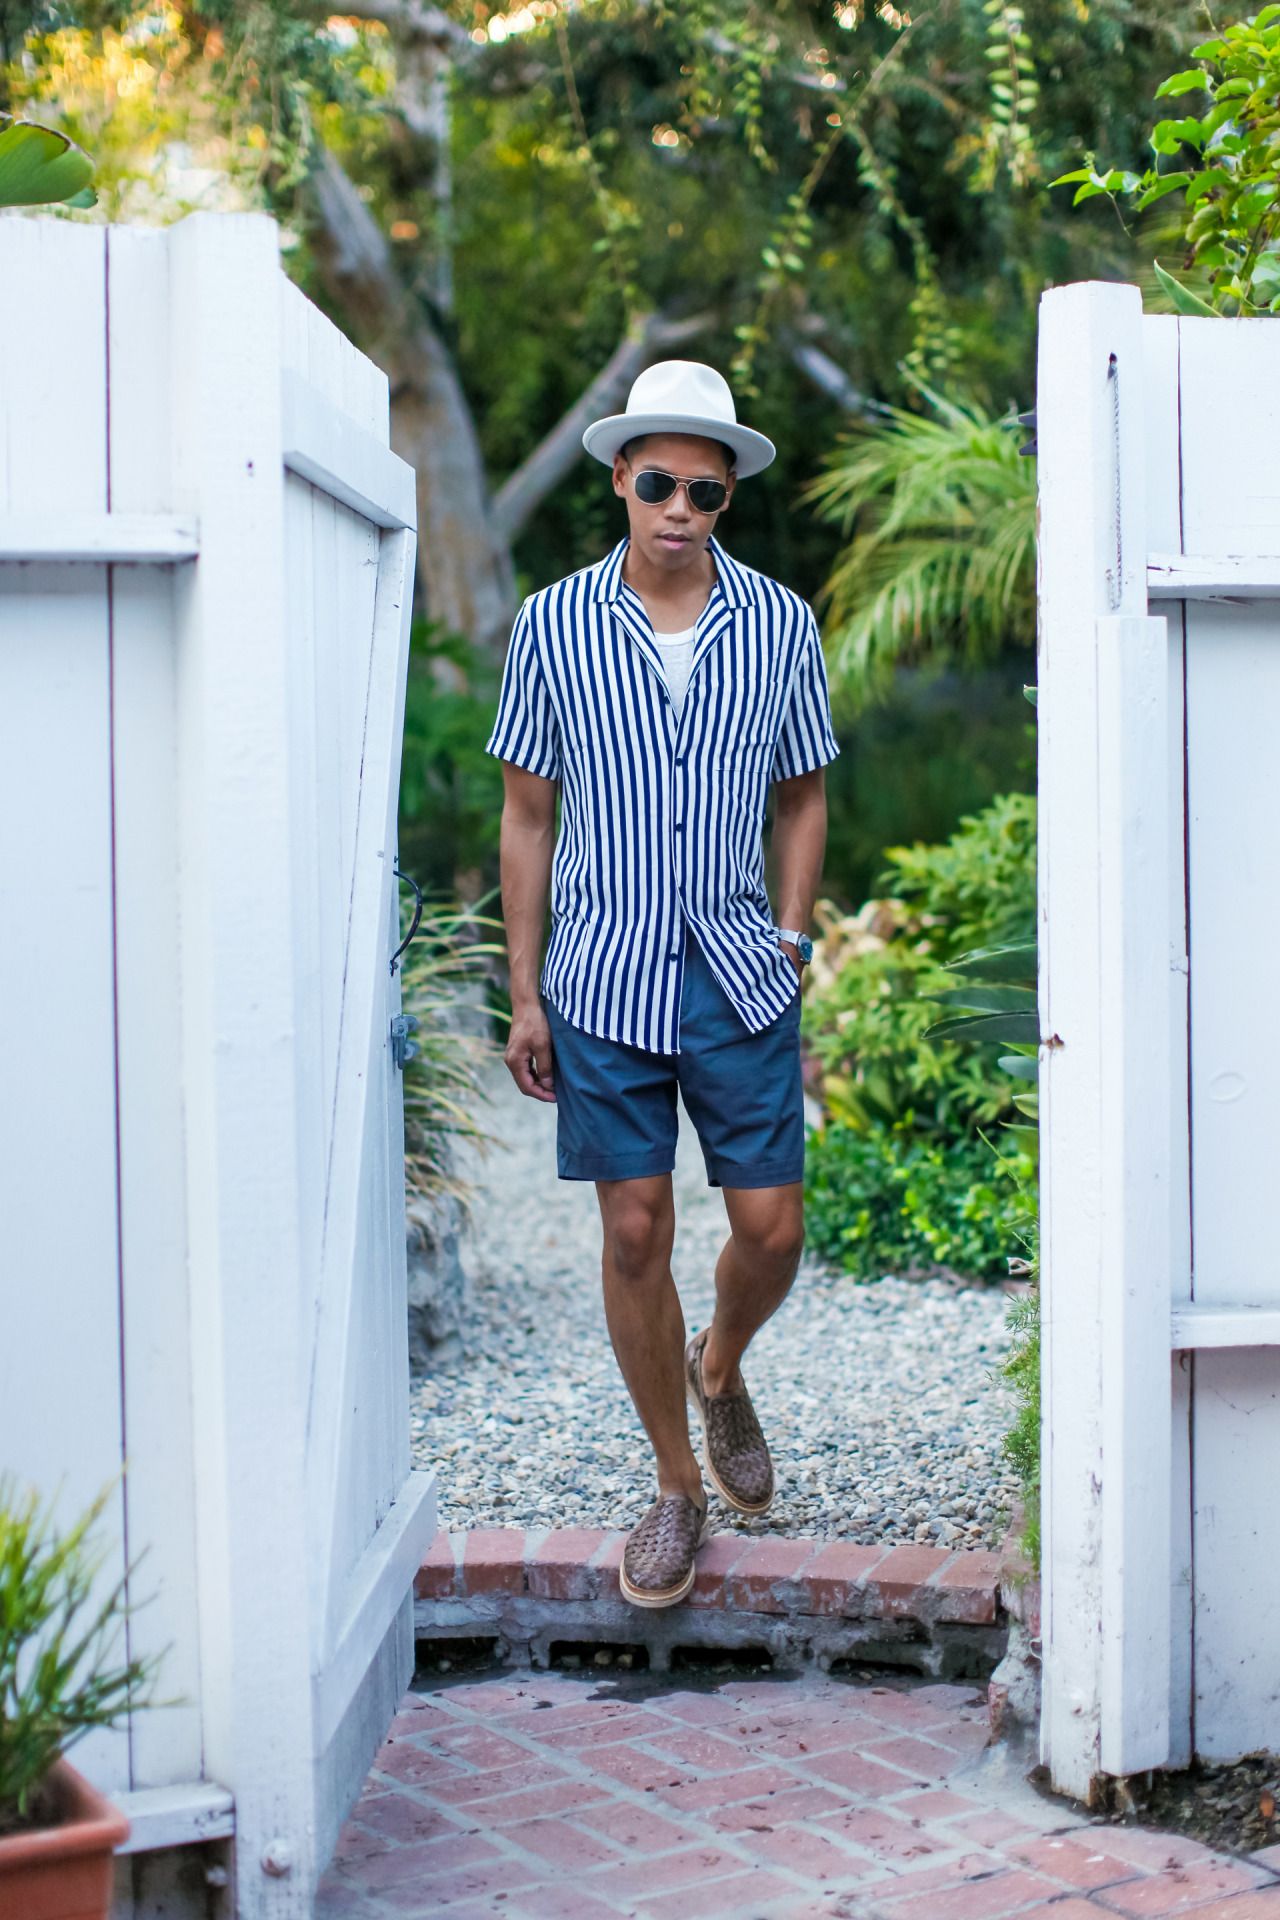 Aesthetic Men's Beach Outfits: Black Casual Summer Styles - A 2023 Forecast